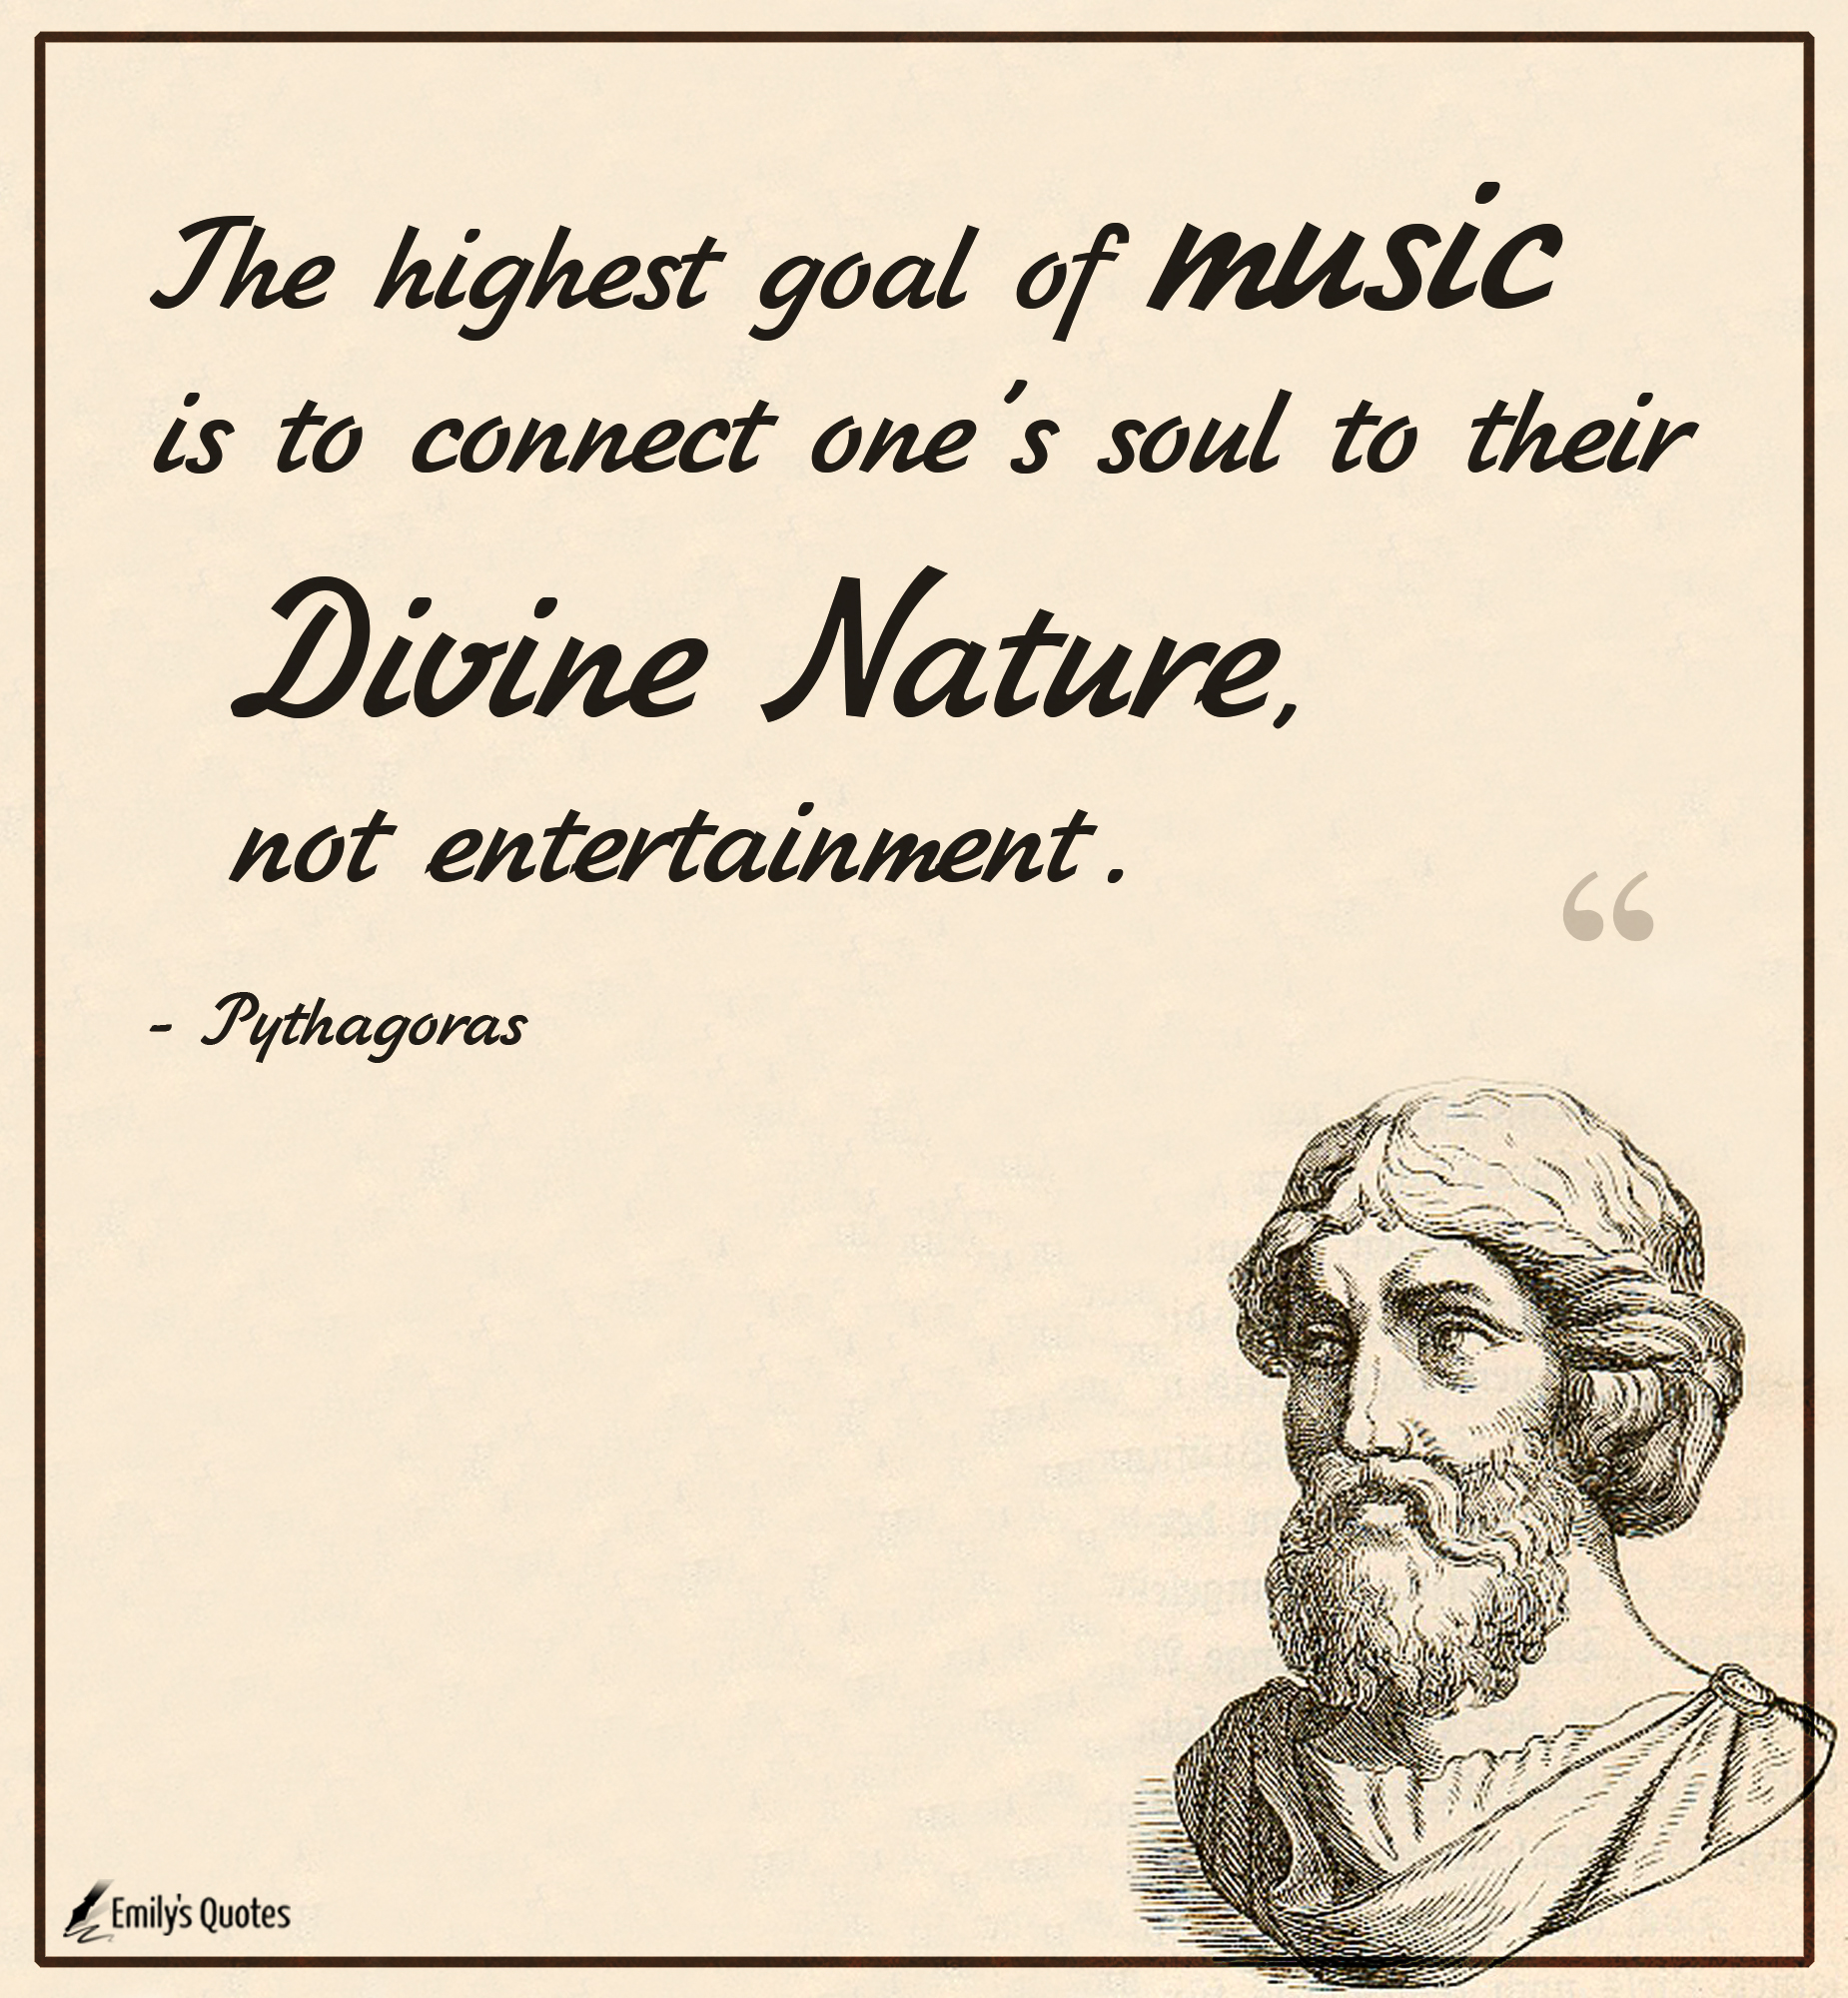 The highest goal of music is to connect one’s soul to their Divine Nature, not entertainment